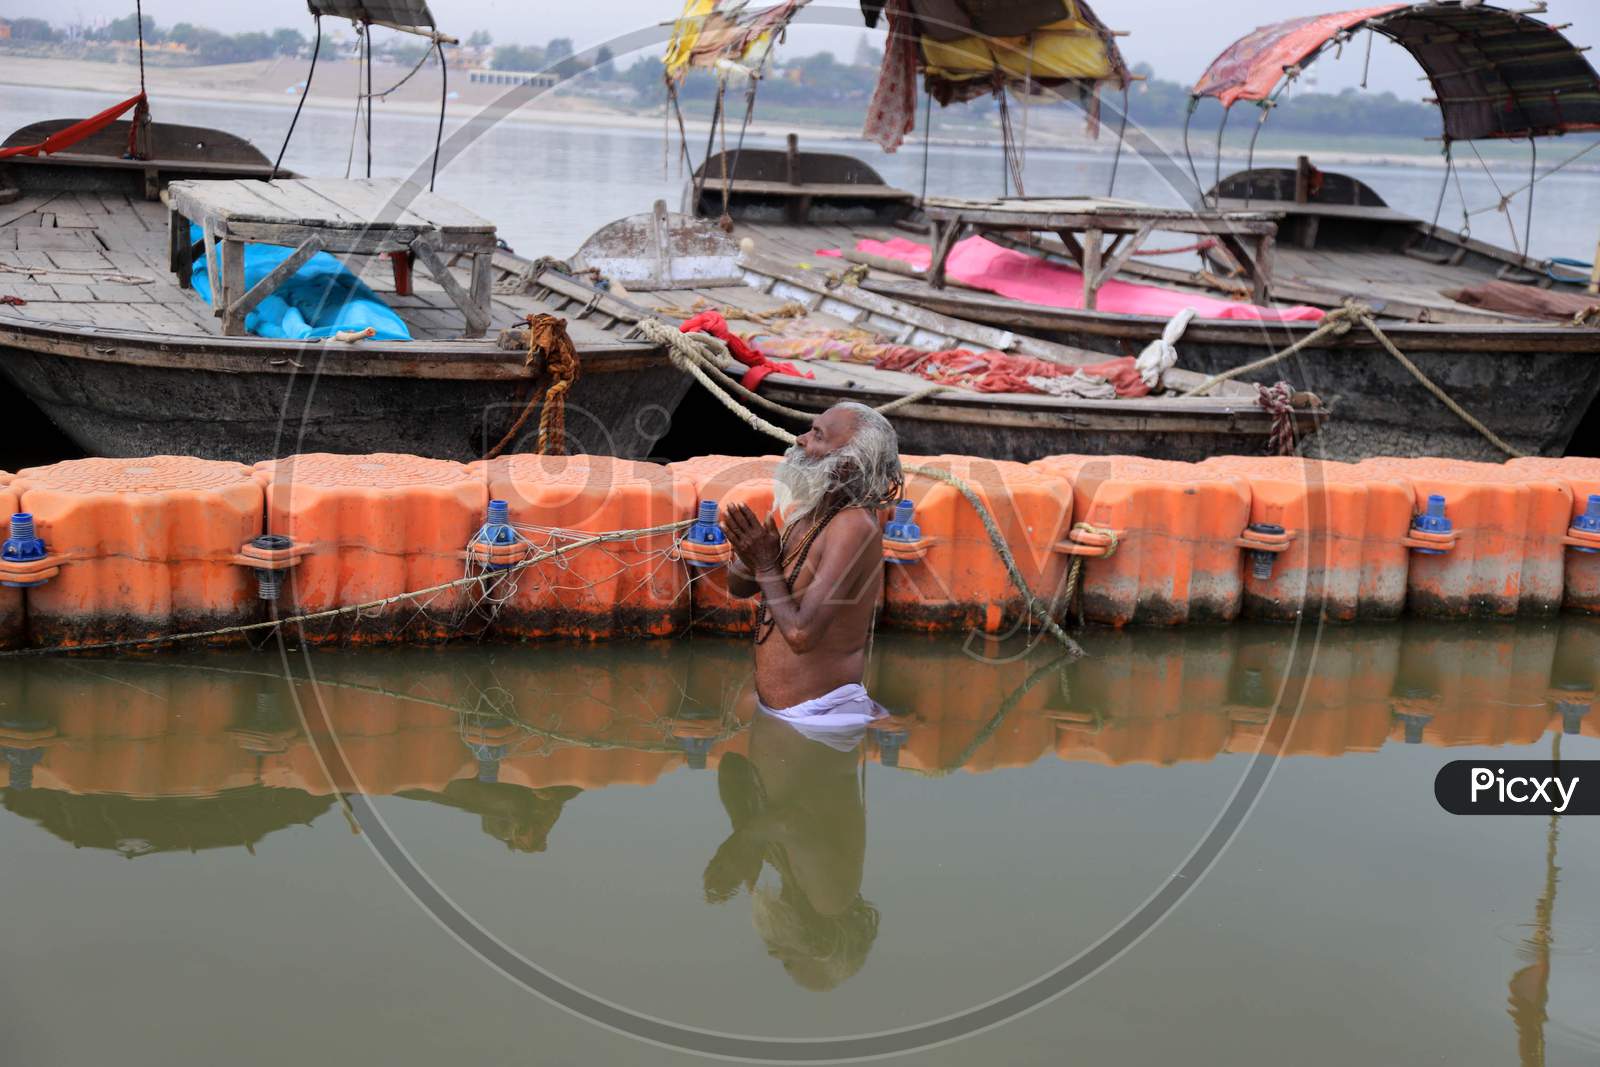 A Sadhu Or Holy Man Offering Prayers After Takesh Holy Dip In The Clean Water Of River Yamuna Uring A 21-Day Nationwide Lockdown To Slow The Spreading Of Coronavirus Disease (Covid-19) In Prayagraj, April 9, 2020.